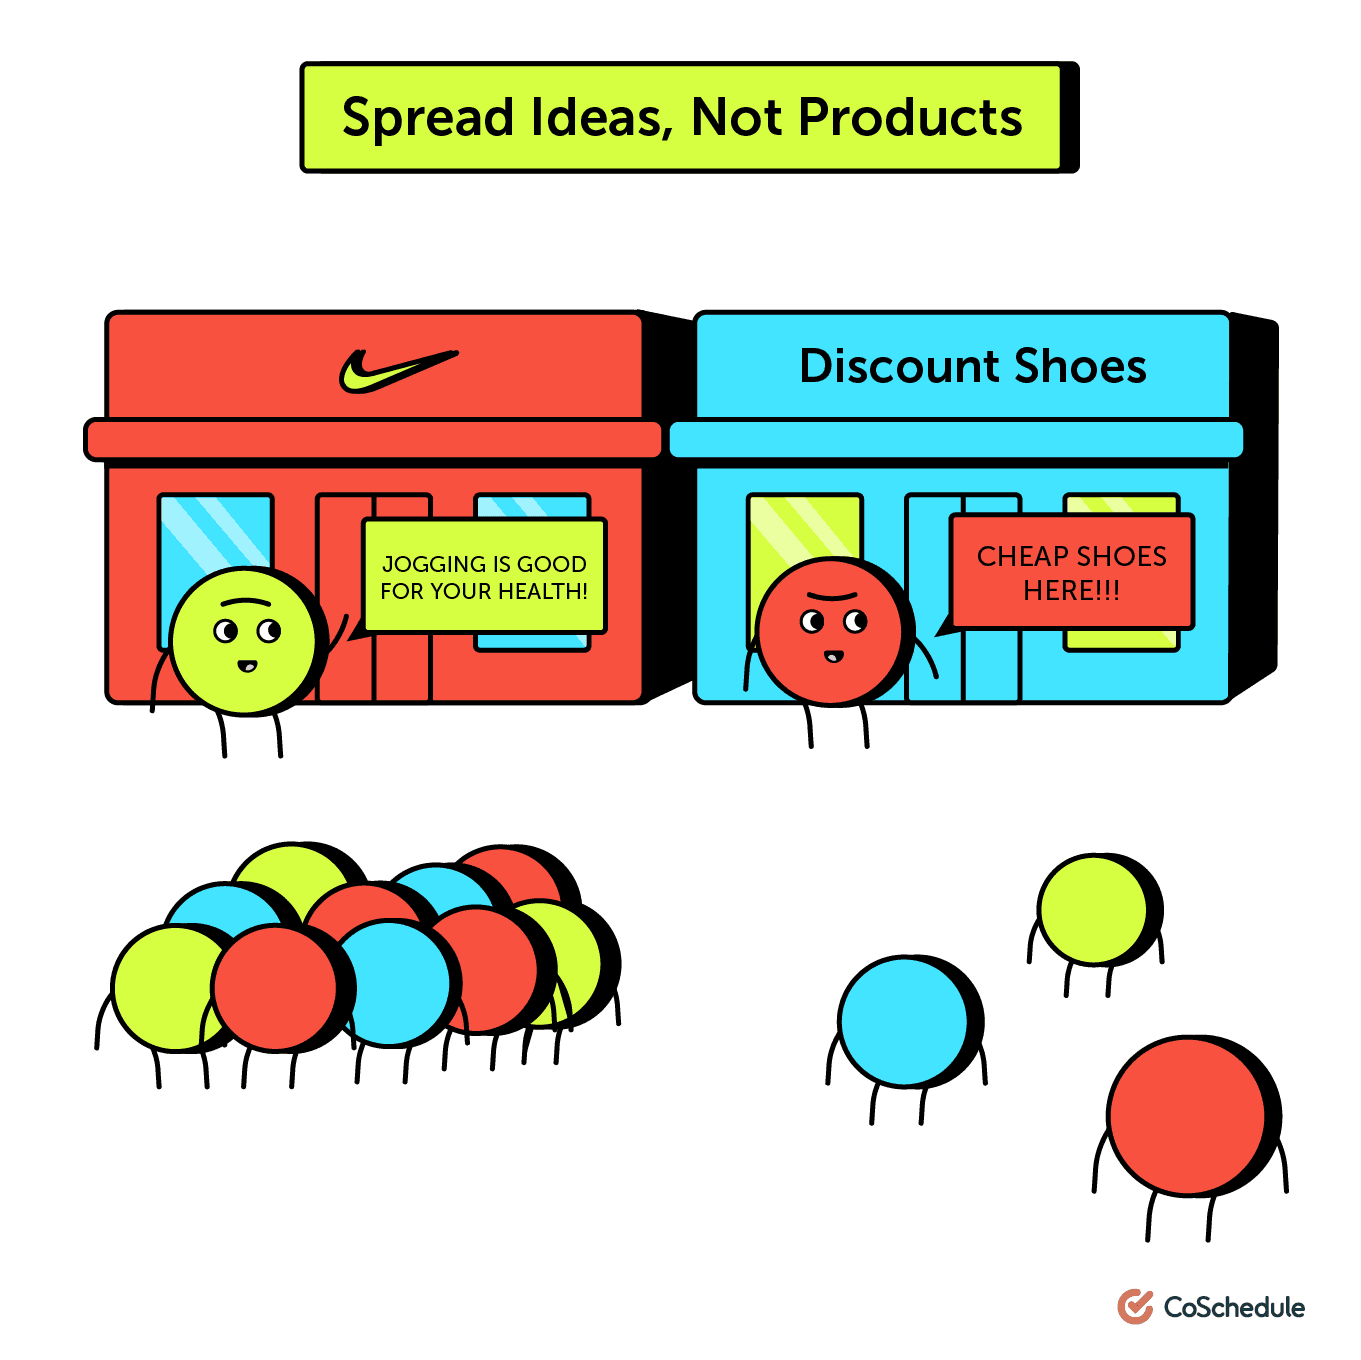 Nike shares ideas, not products